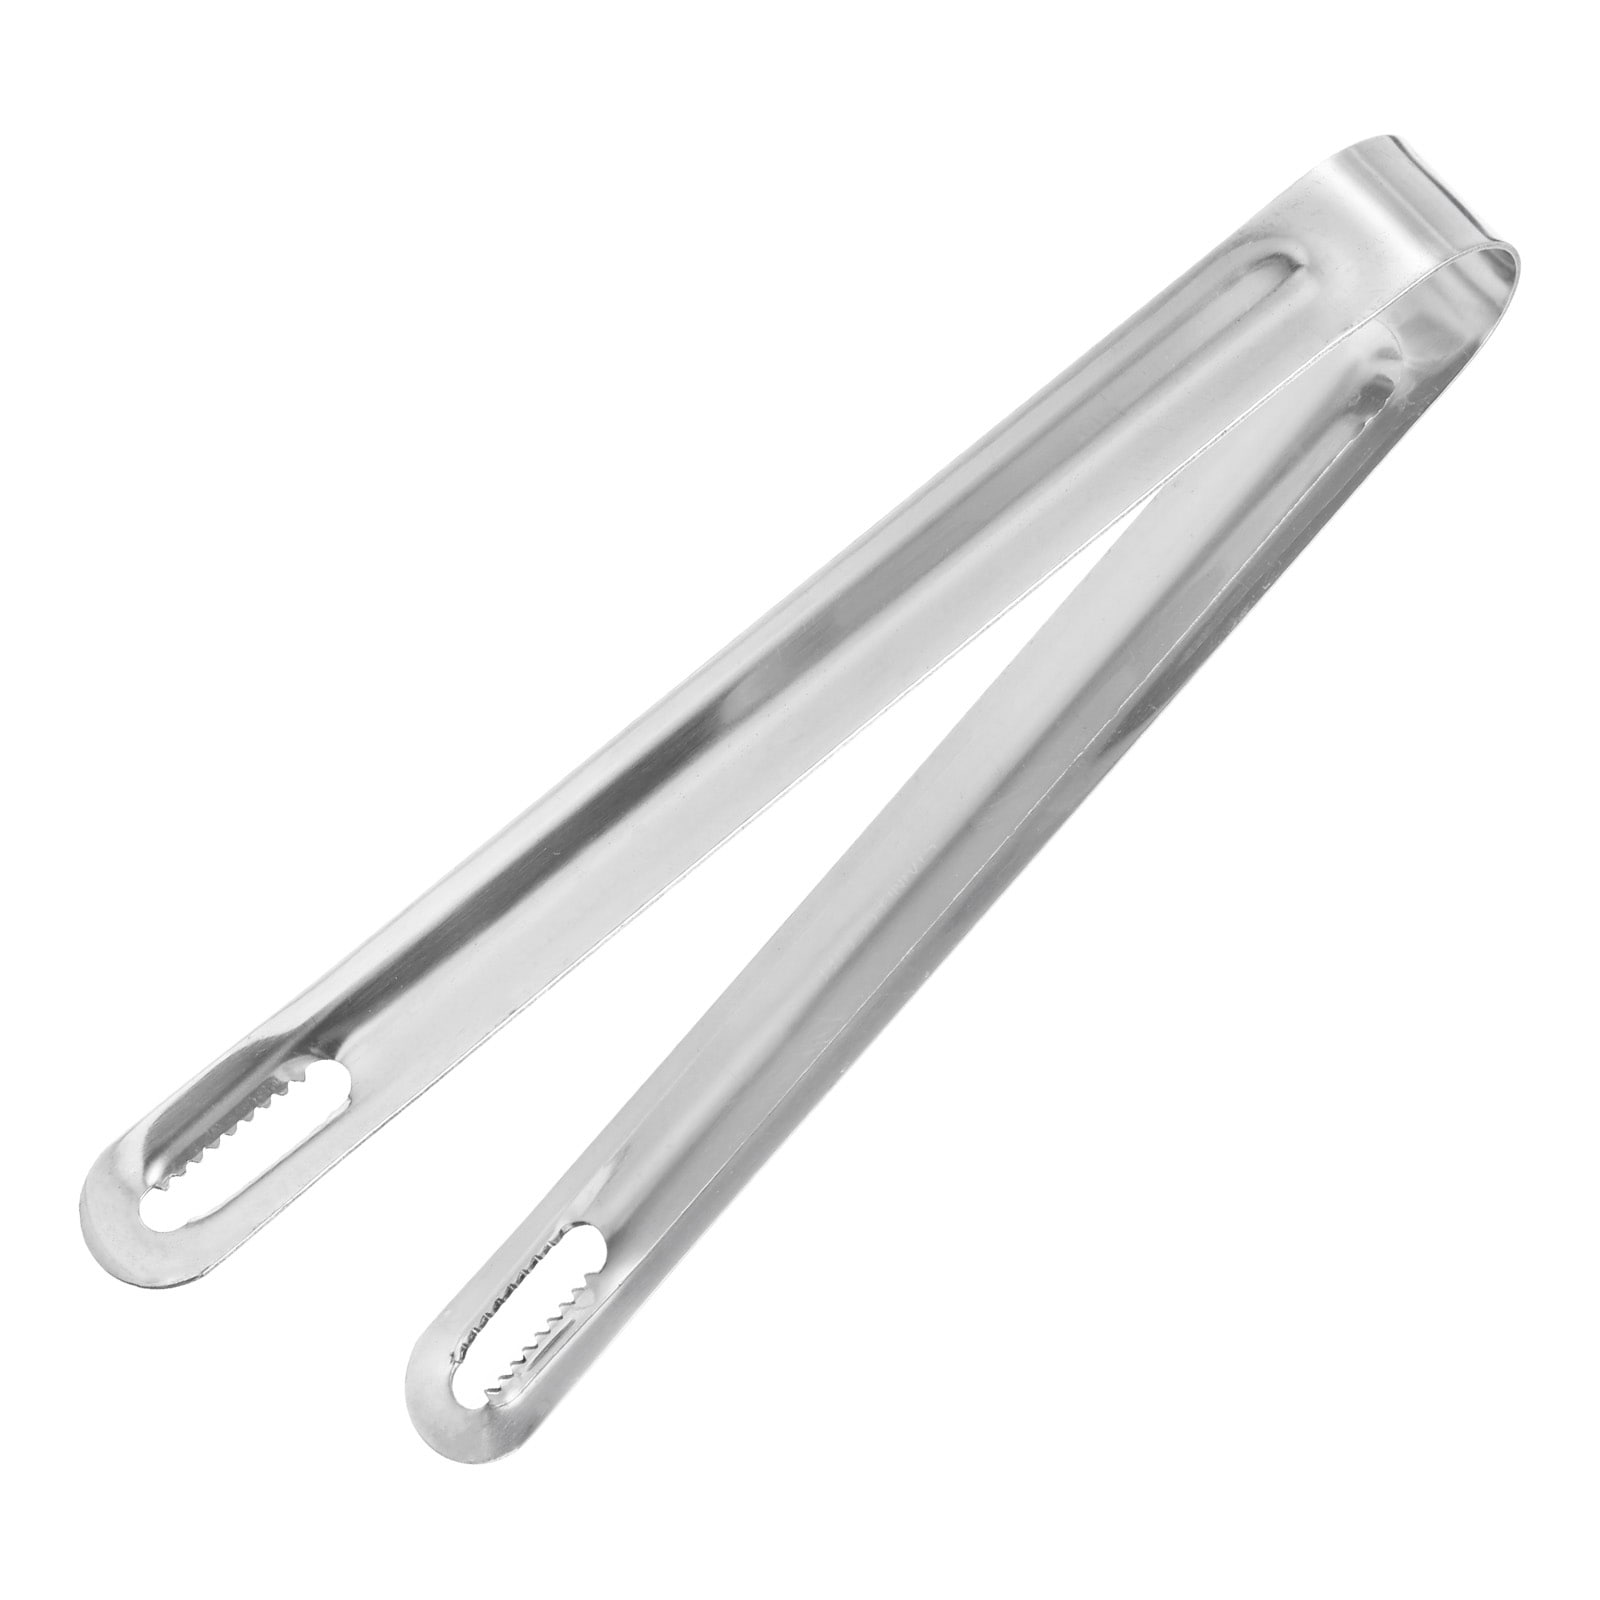 Handy Housewares 5 Long Stainless Steel Mini Tongs with Silicone Hand